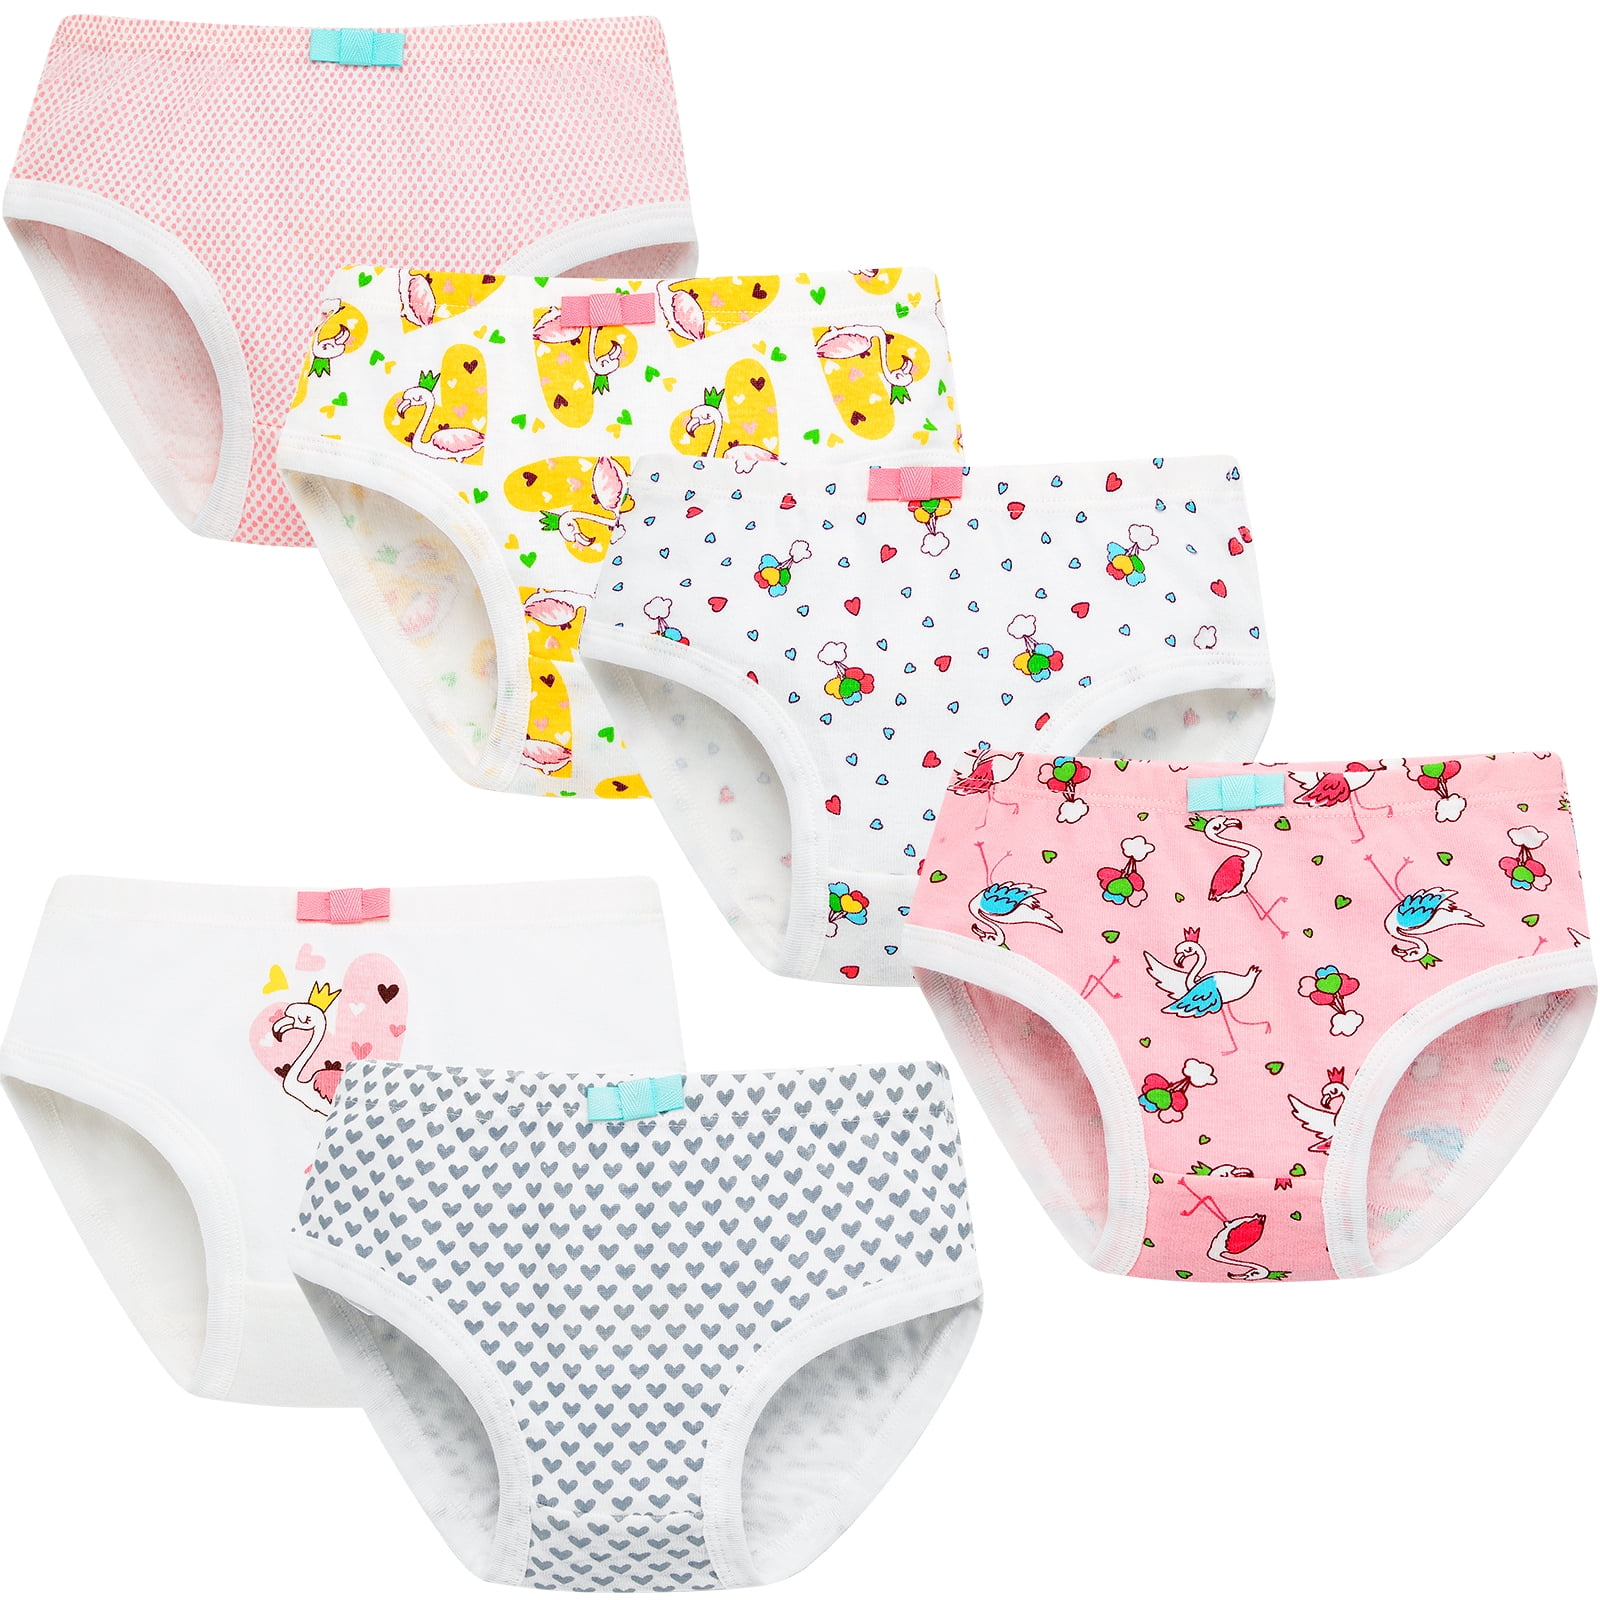 Synpos Toddler Baby Girls Underwear 100% Cotton Panties for 2-7 Years  Old,Pack of 6